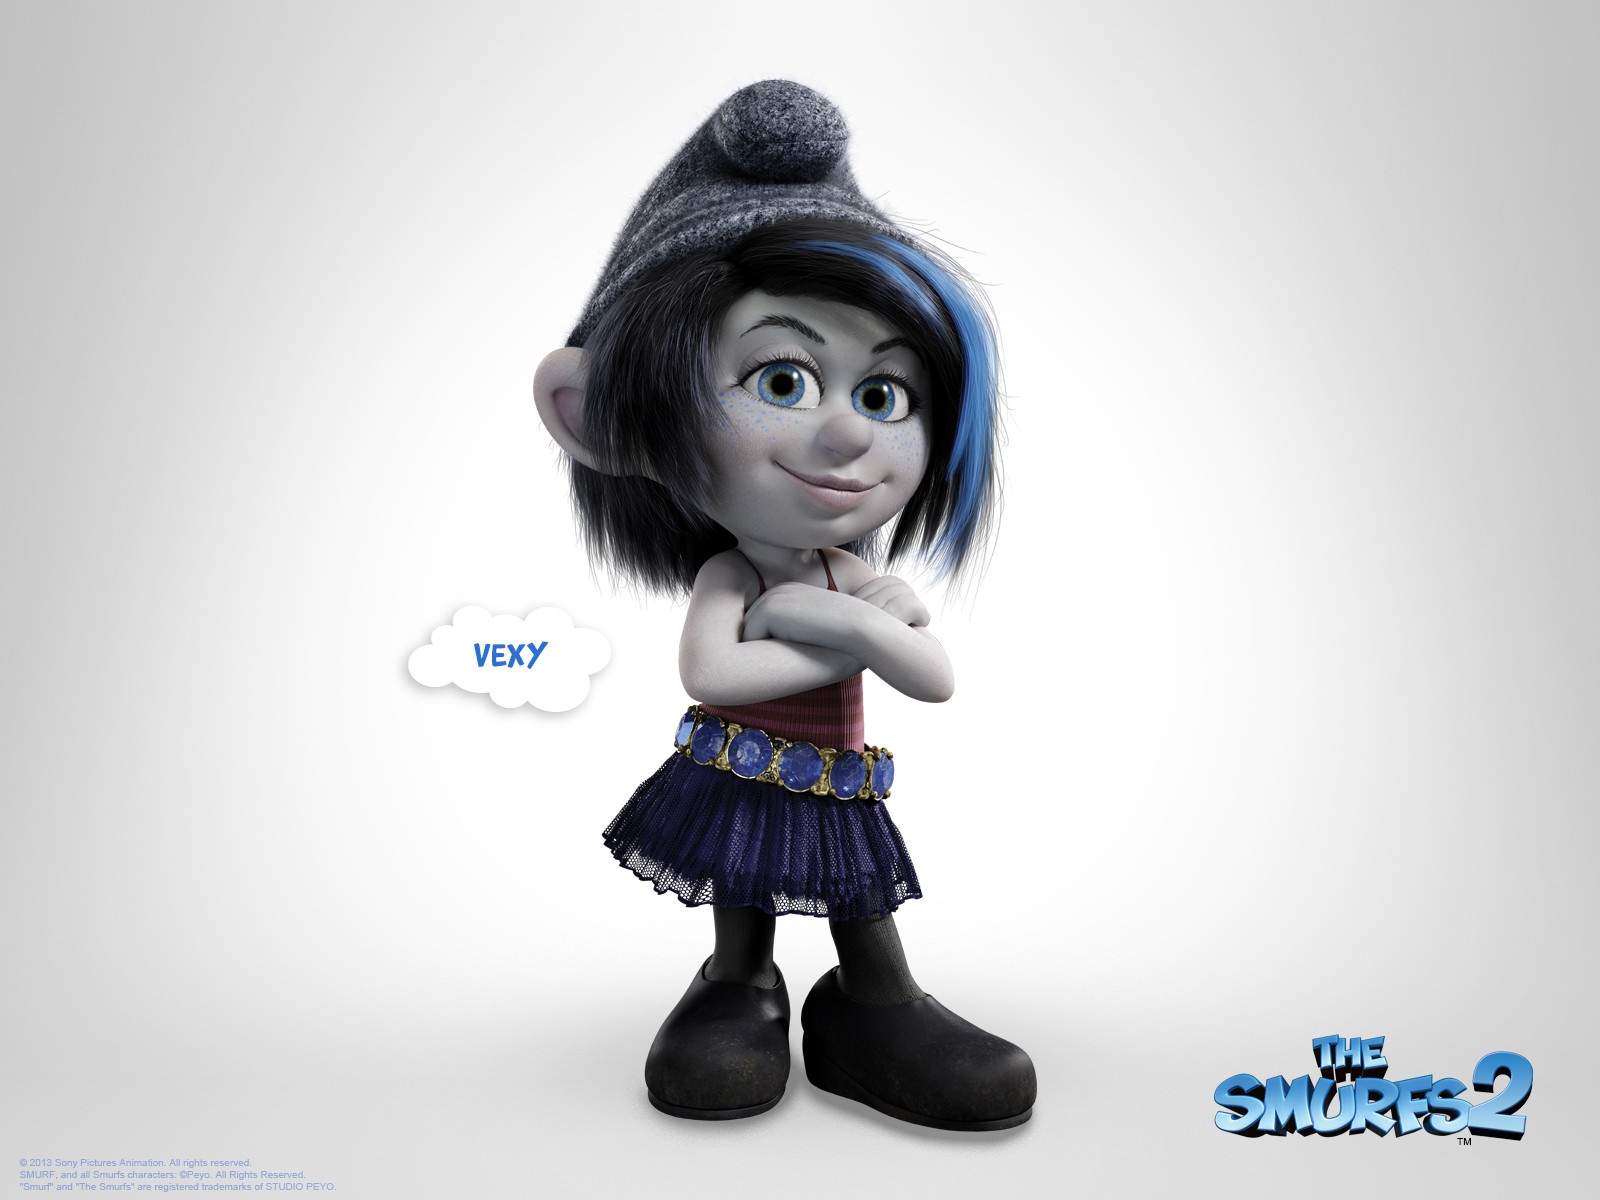 The Smurfs 2 HD movie wallpapers #11 - 1600x1200